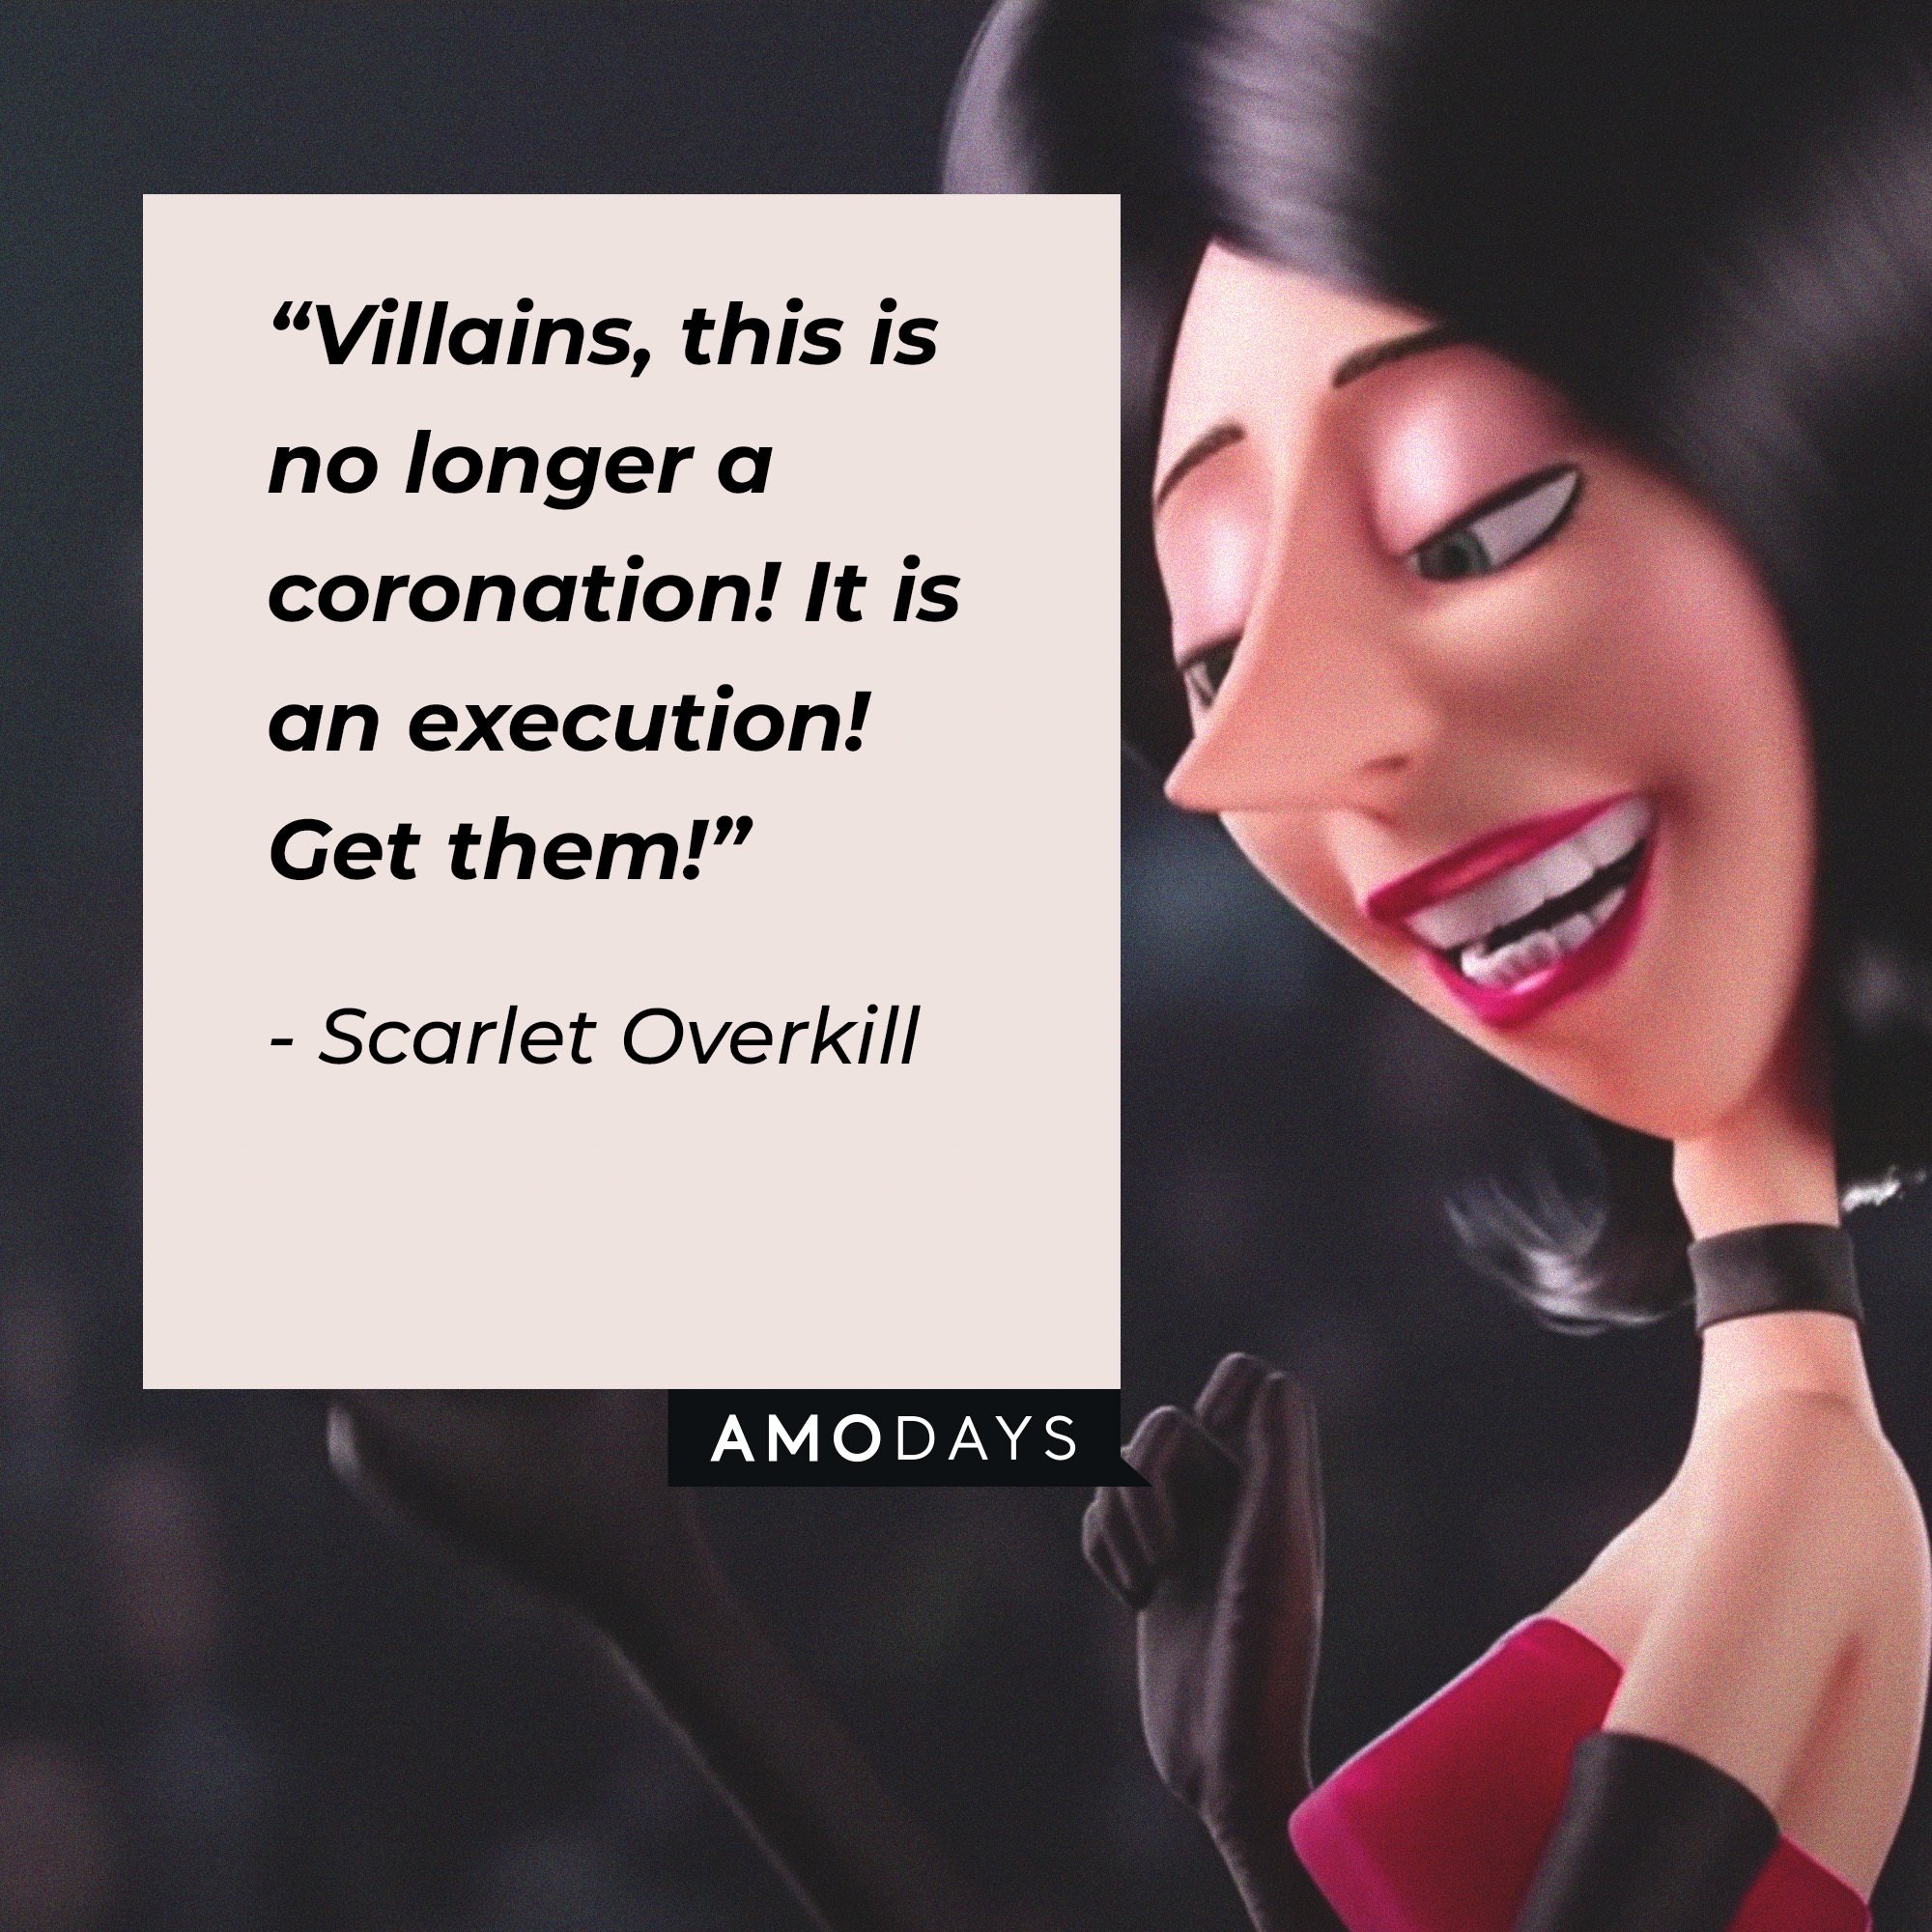 Scarlet Overkill's quote: “Villains, this is no longer a coronation! It is an execution! Get them!” | Image: AmoDays